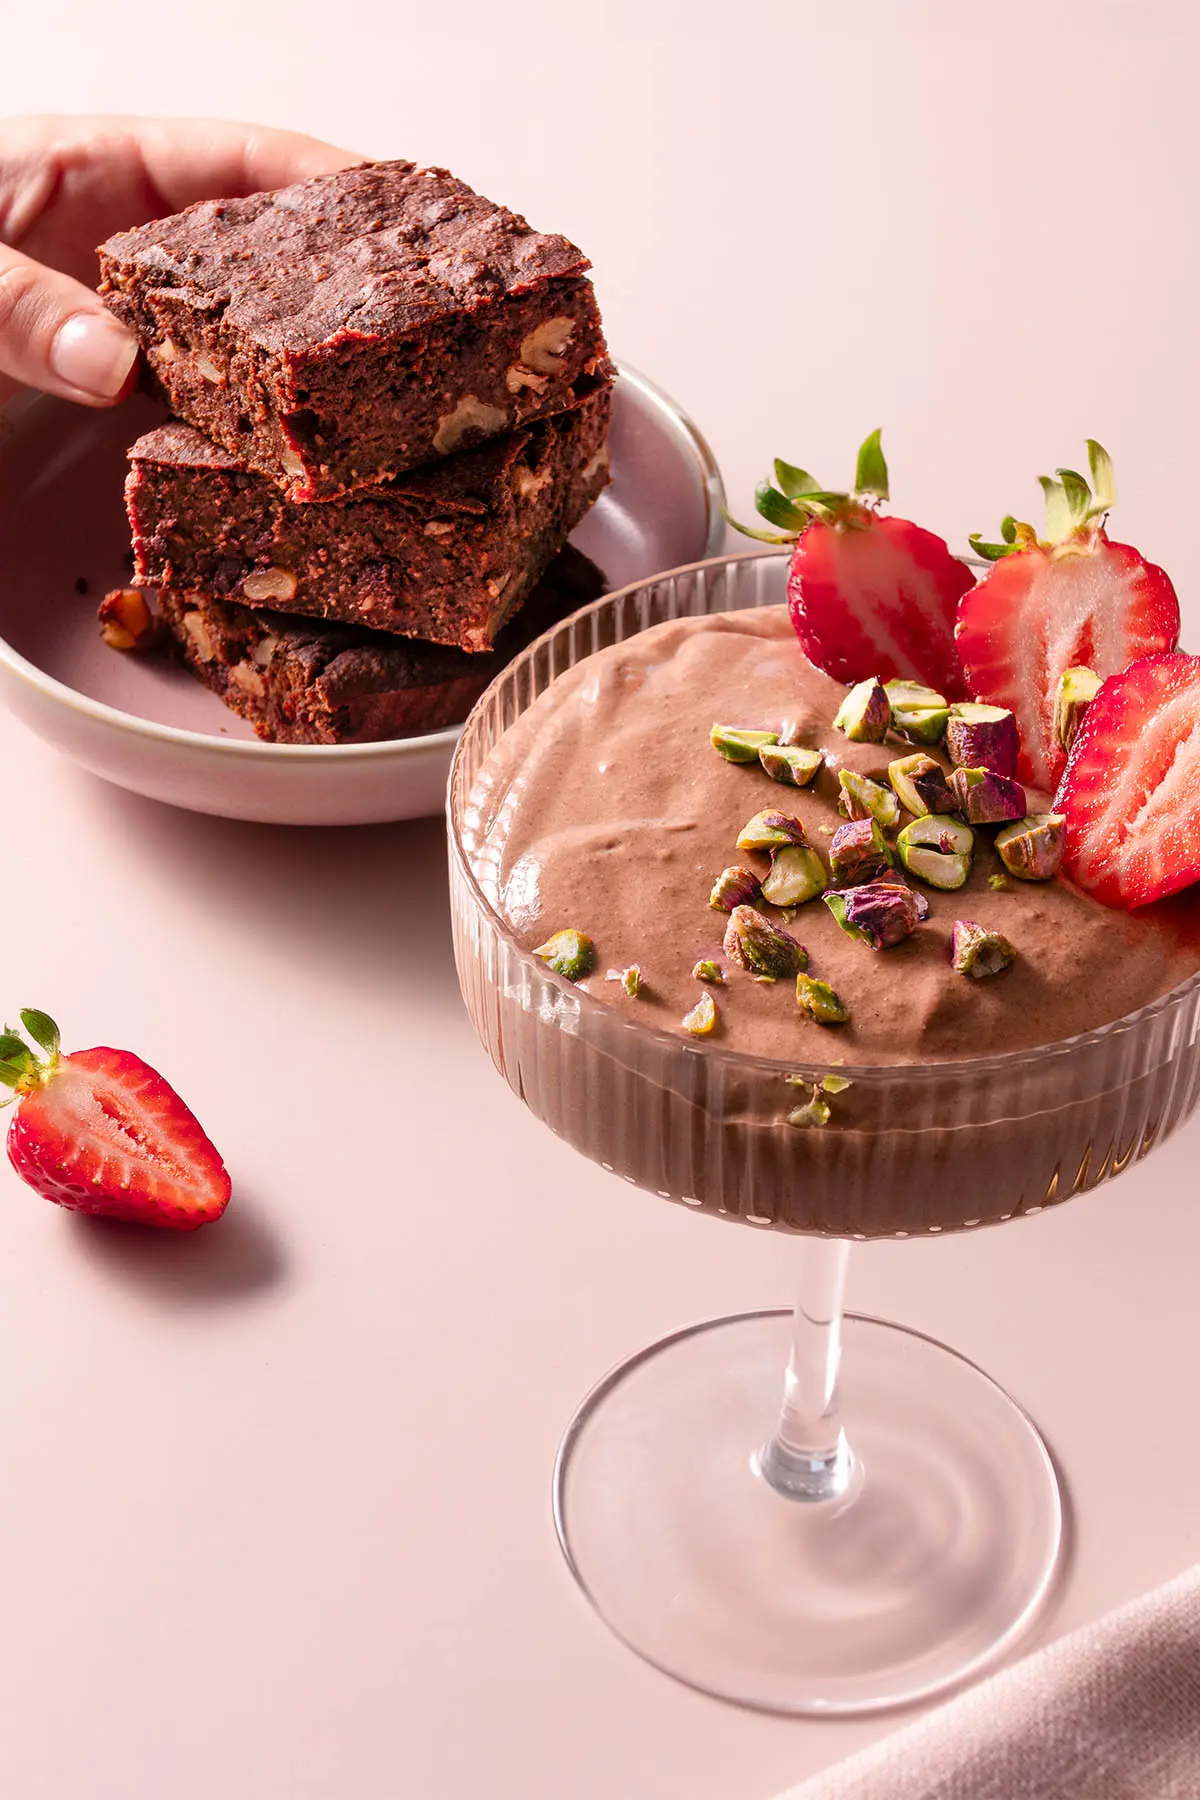 Delicious desserts featured in The Ultimate Plant-Based Cookbook by Sarah Cobacho